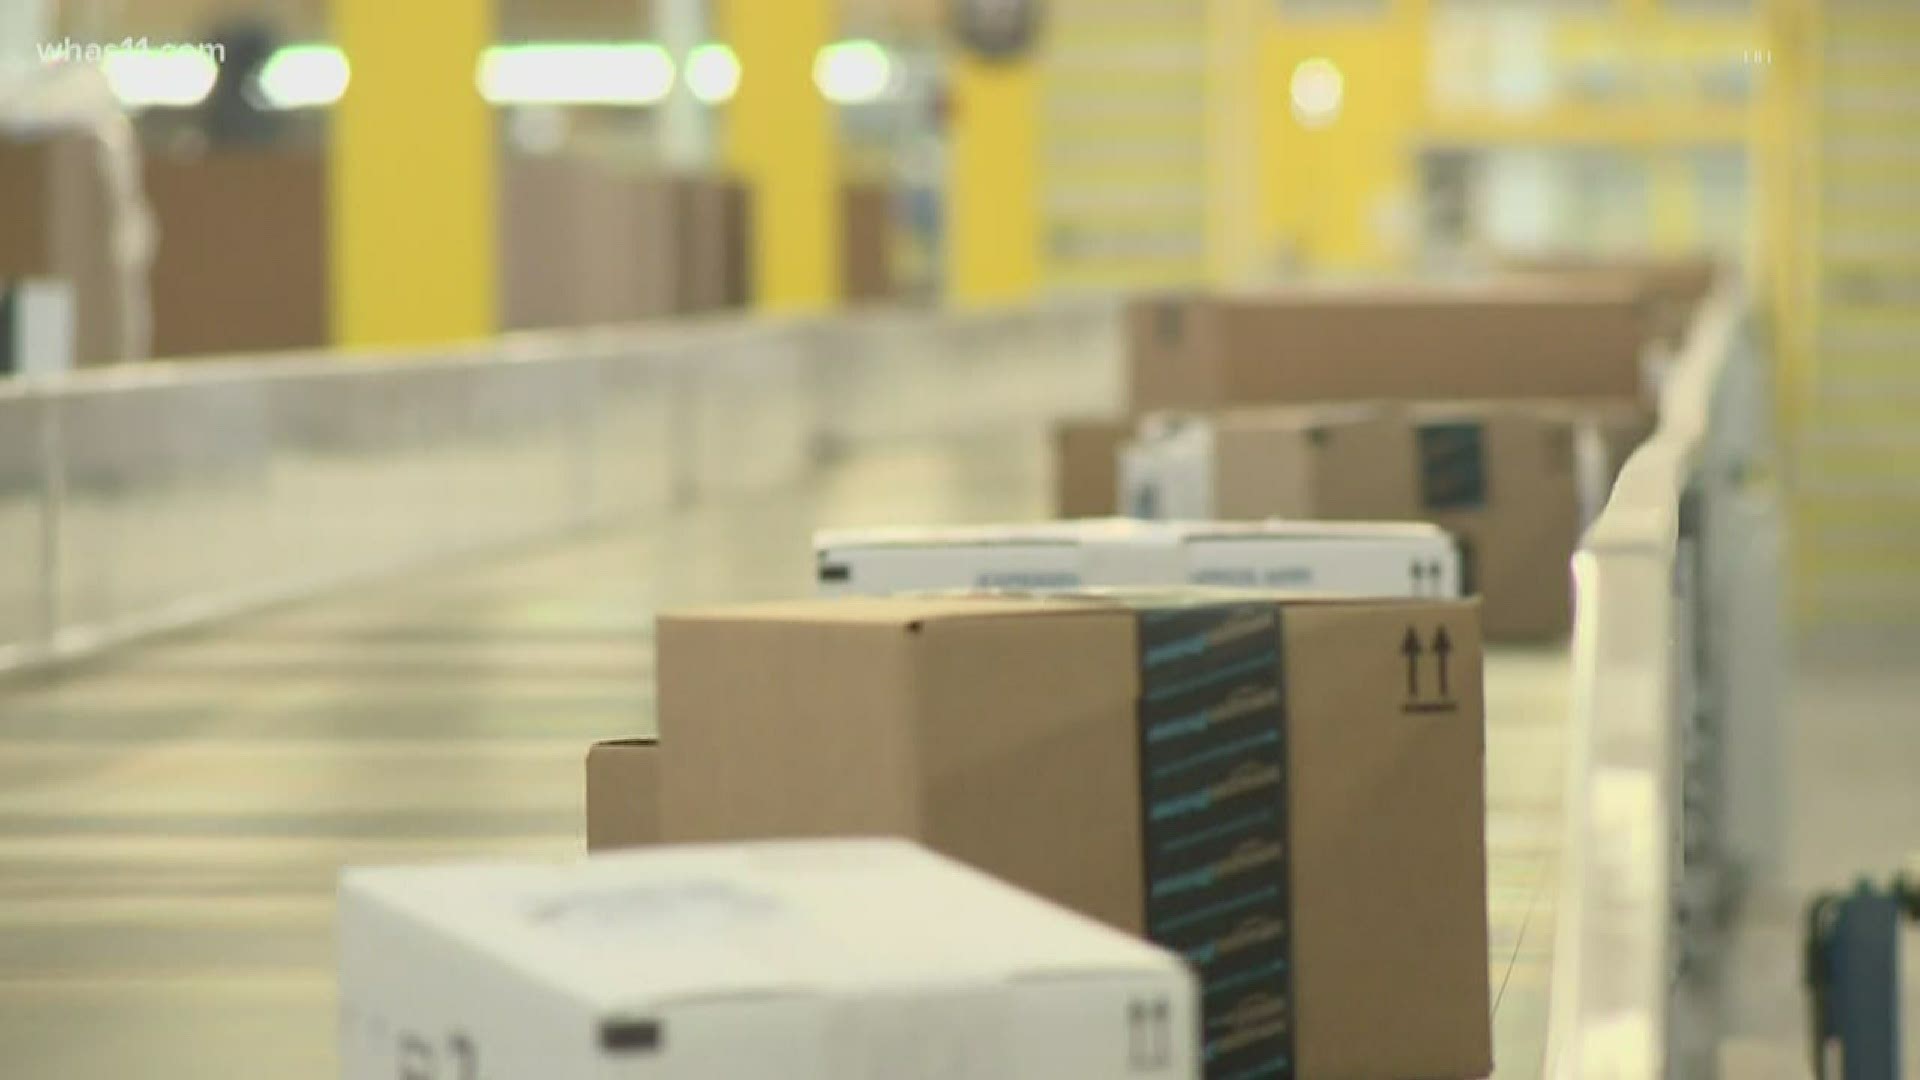 On May 14, Amazon confirmed the first death of an employee at its Jeffersonville facility due to coronavirus. But exact numbers of cases are hard to pinpoint.